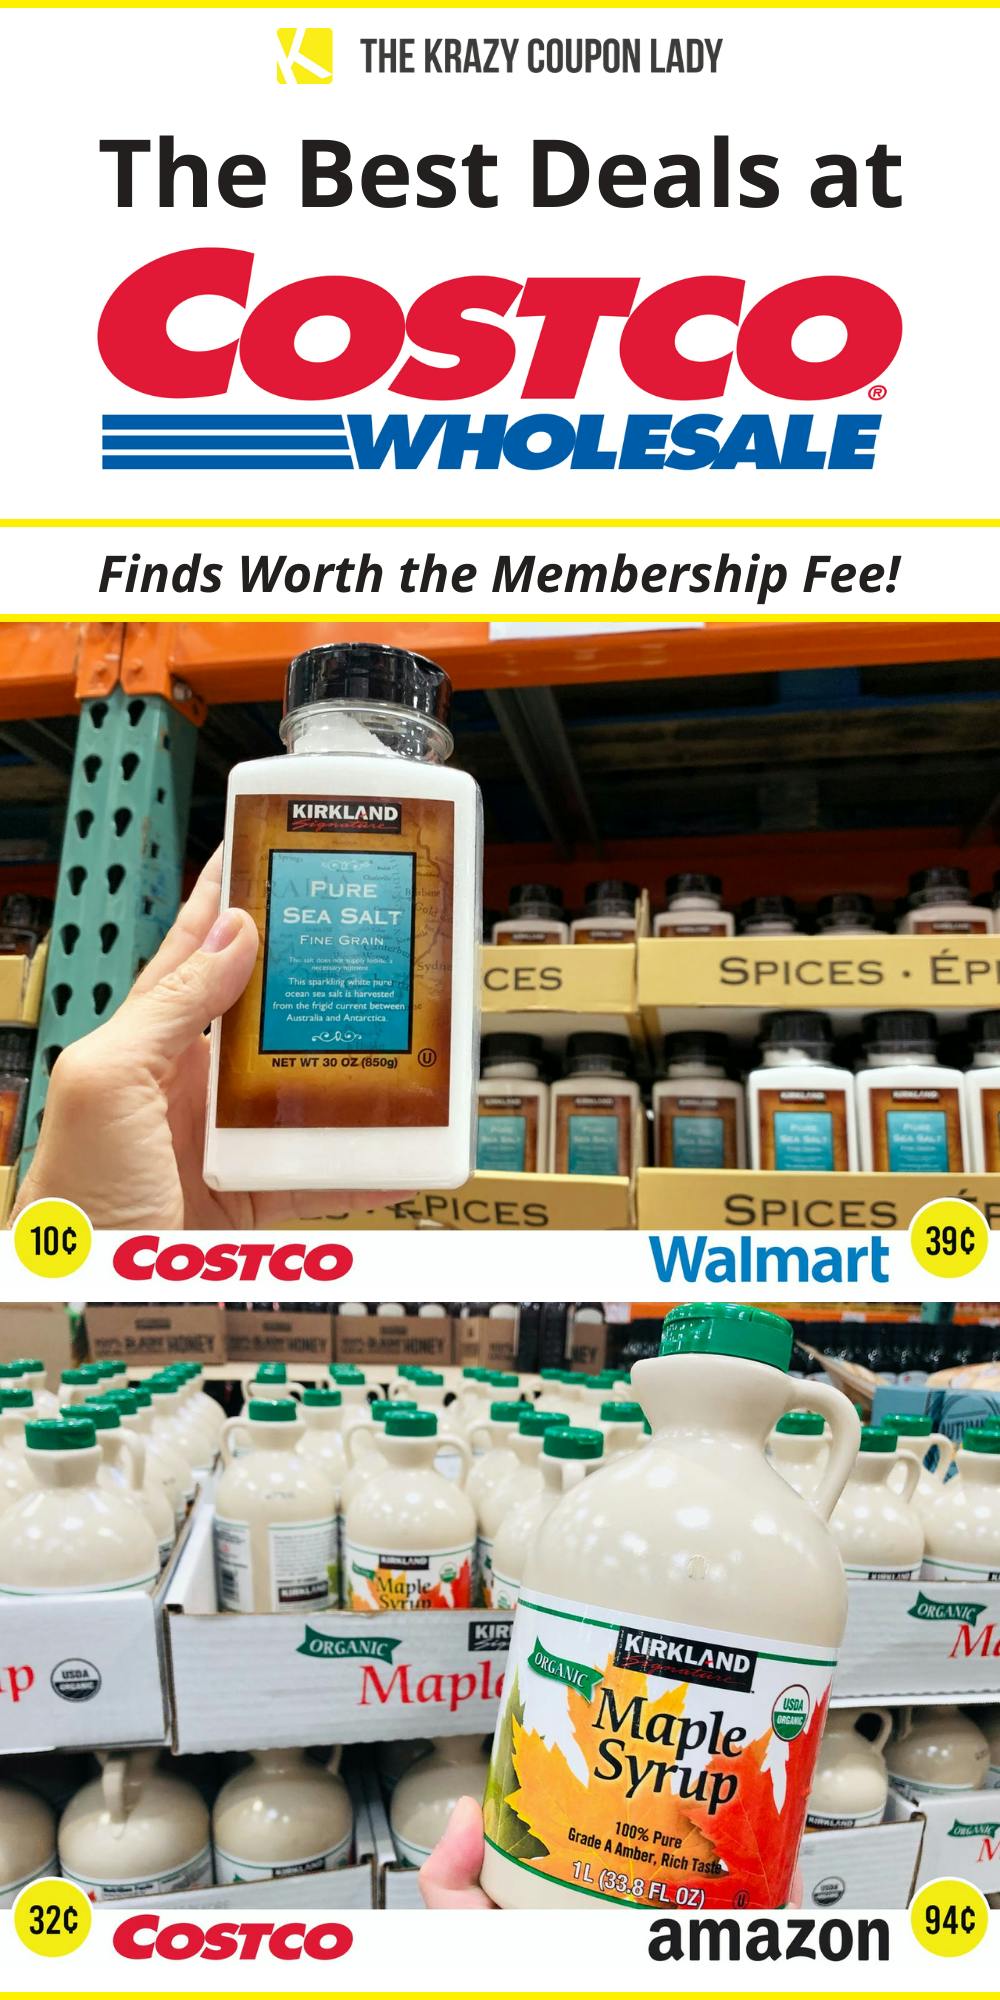 Best Deals at Costco: 16 Items That'll Justify Your Membership Fee